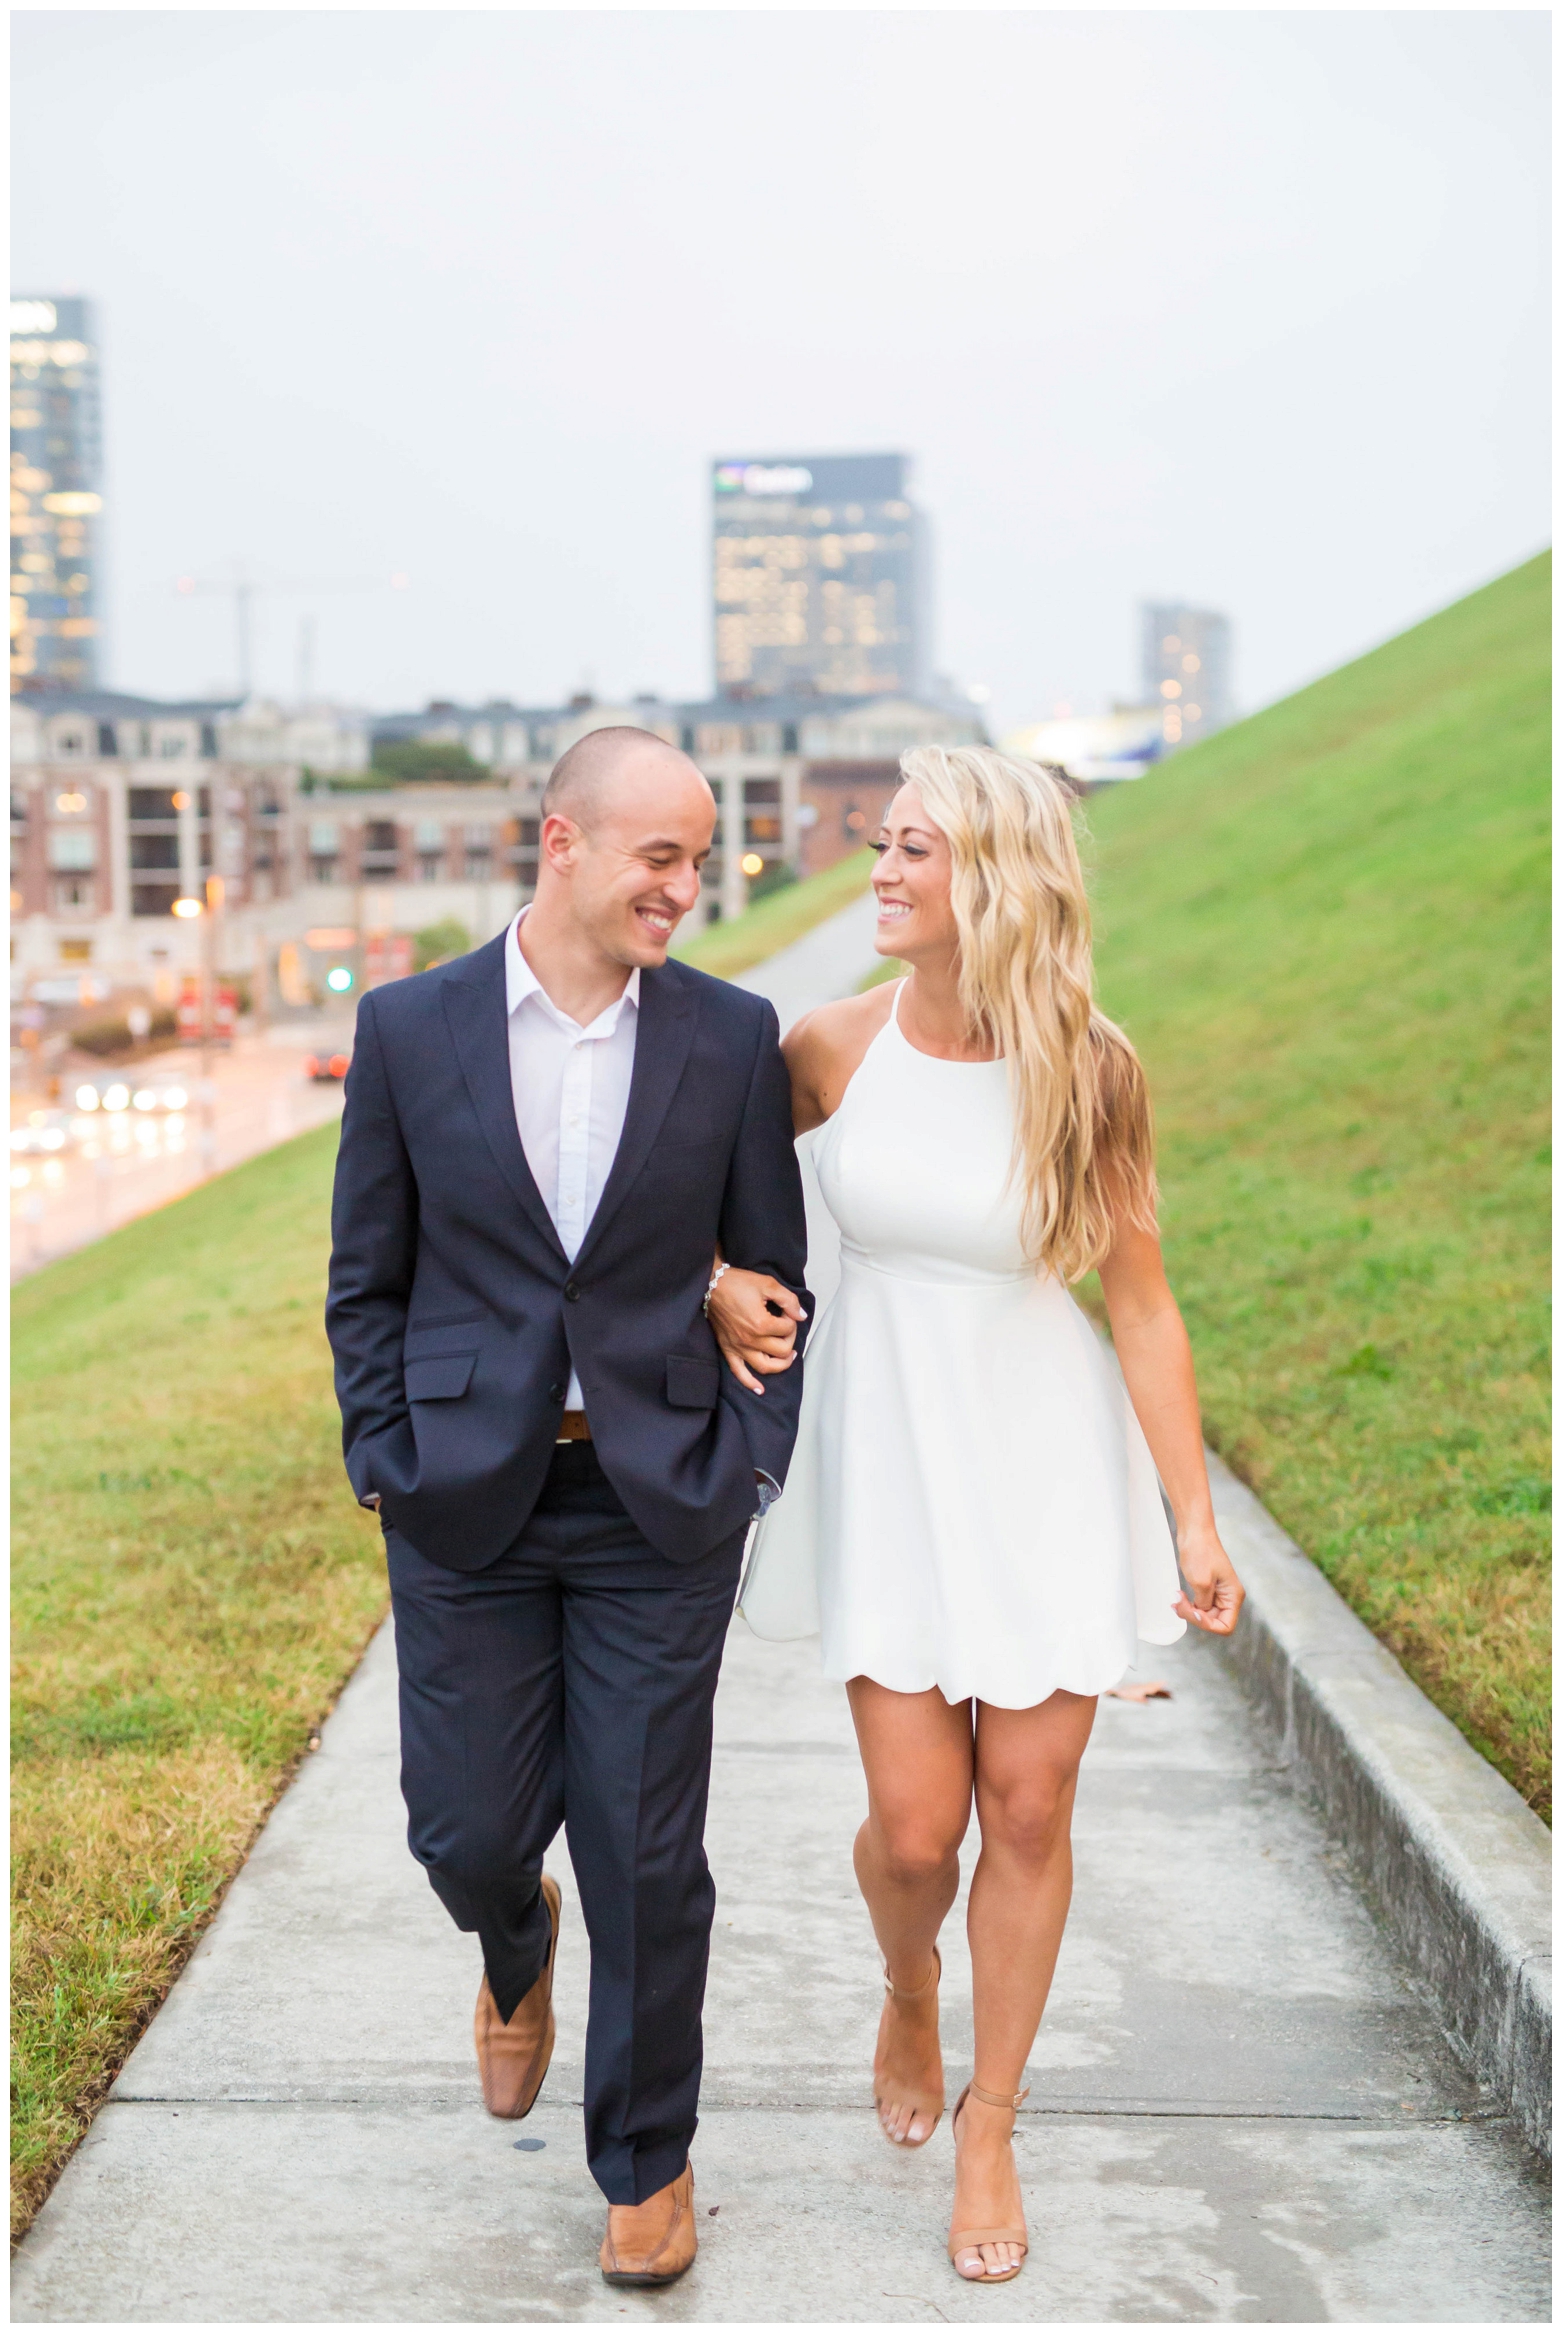 View More: http://hopetaylorphotographyphotos.pass.us/brittney-and-bryan